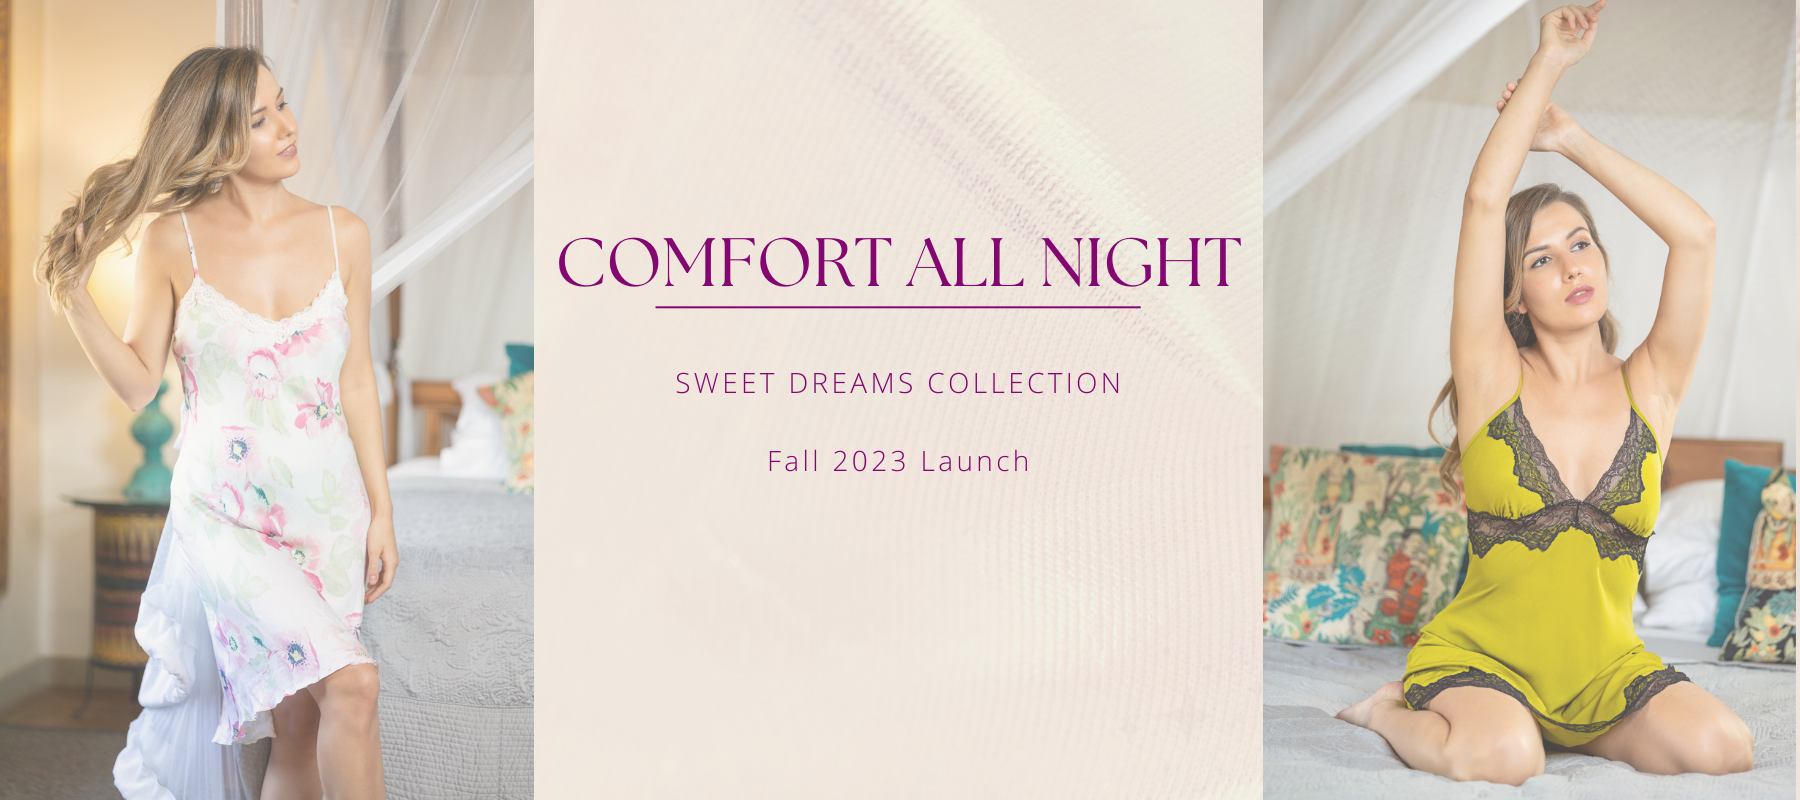 Fall 2023 Sweet Dreams Collection